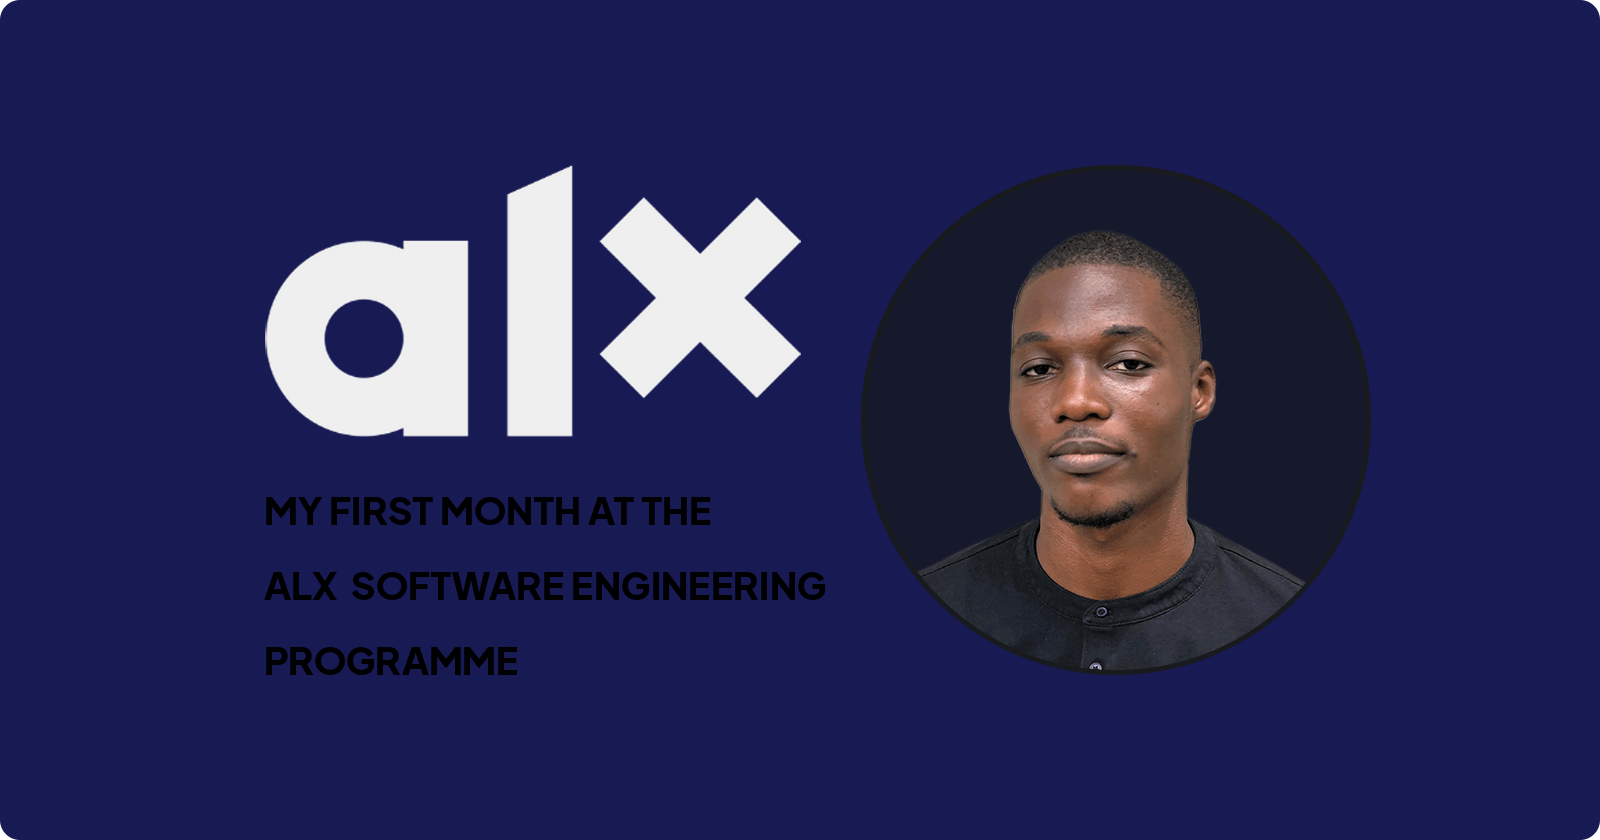 My First Month at the ALX Software Engineering Programme